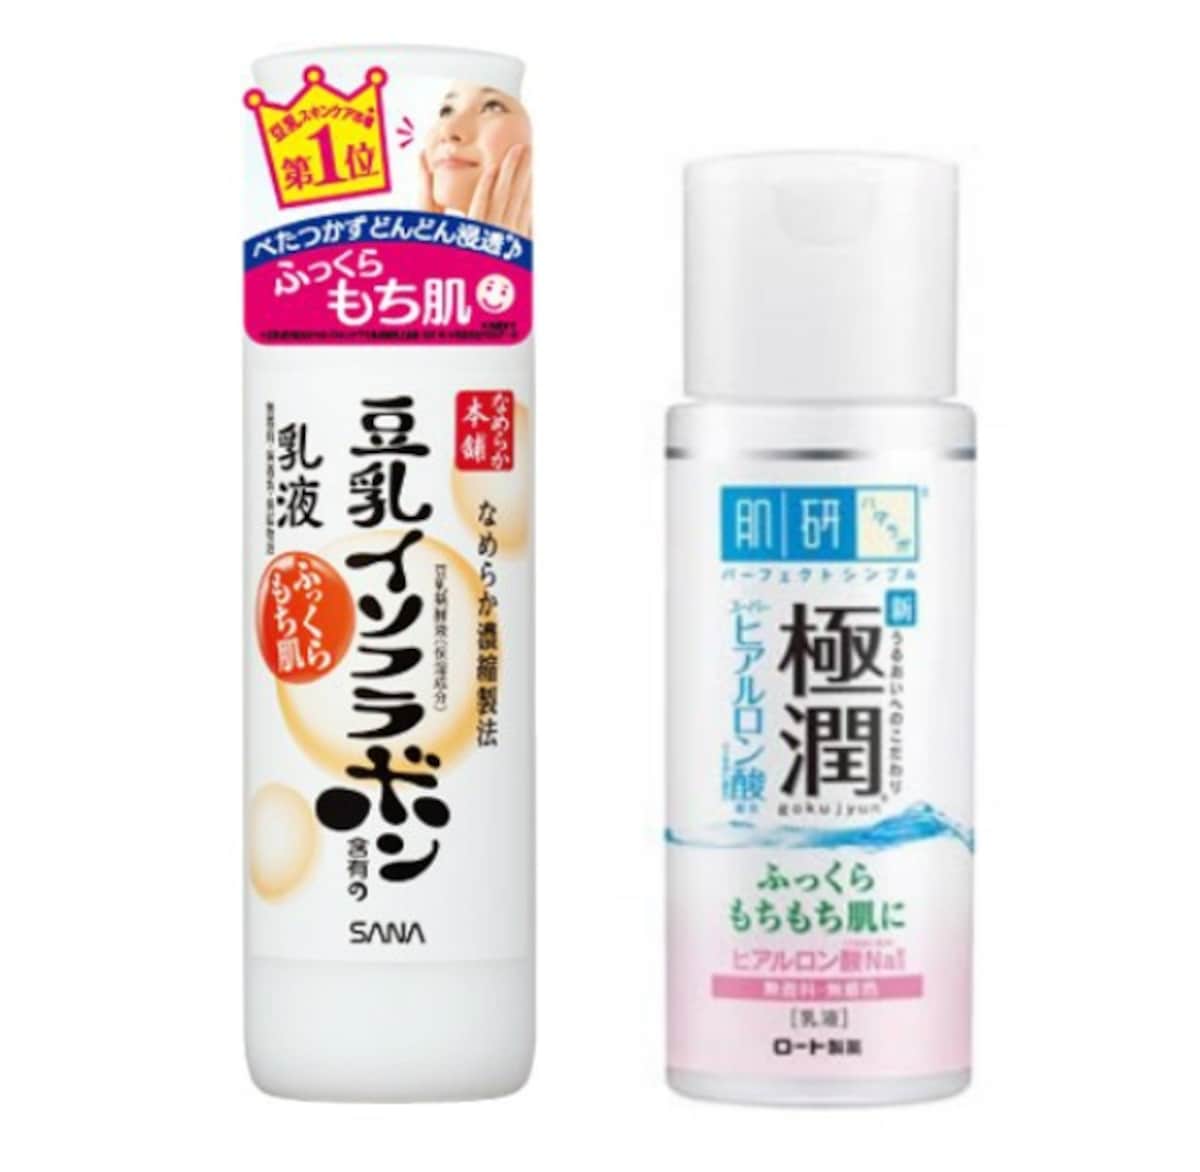 Paine Gillic Unravel chance A Beginner's Guide to Japanese Skin Care | All About Japan